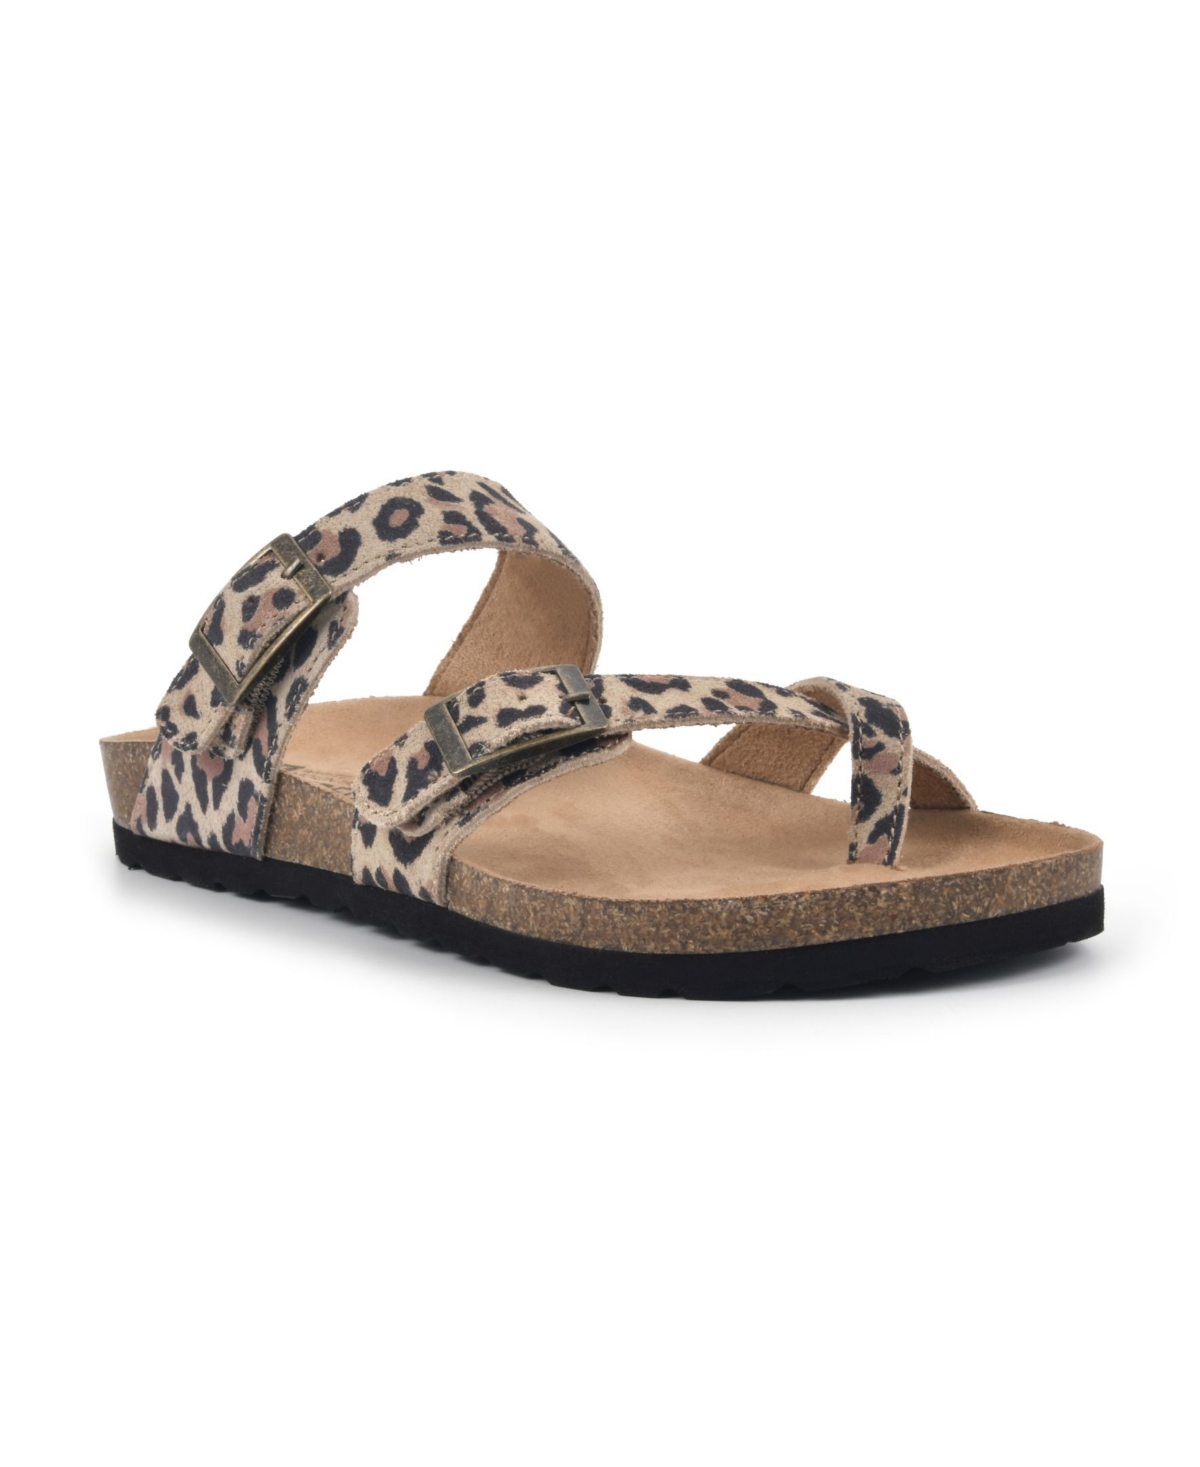 WHITE MOUNTAIN WOMEN'S GRACIE LEATHER FOOTBED SANDAL WOMEN'S SHOES